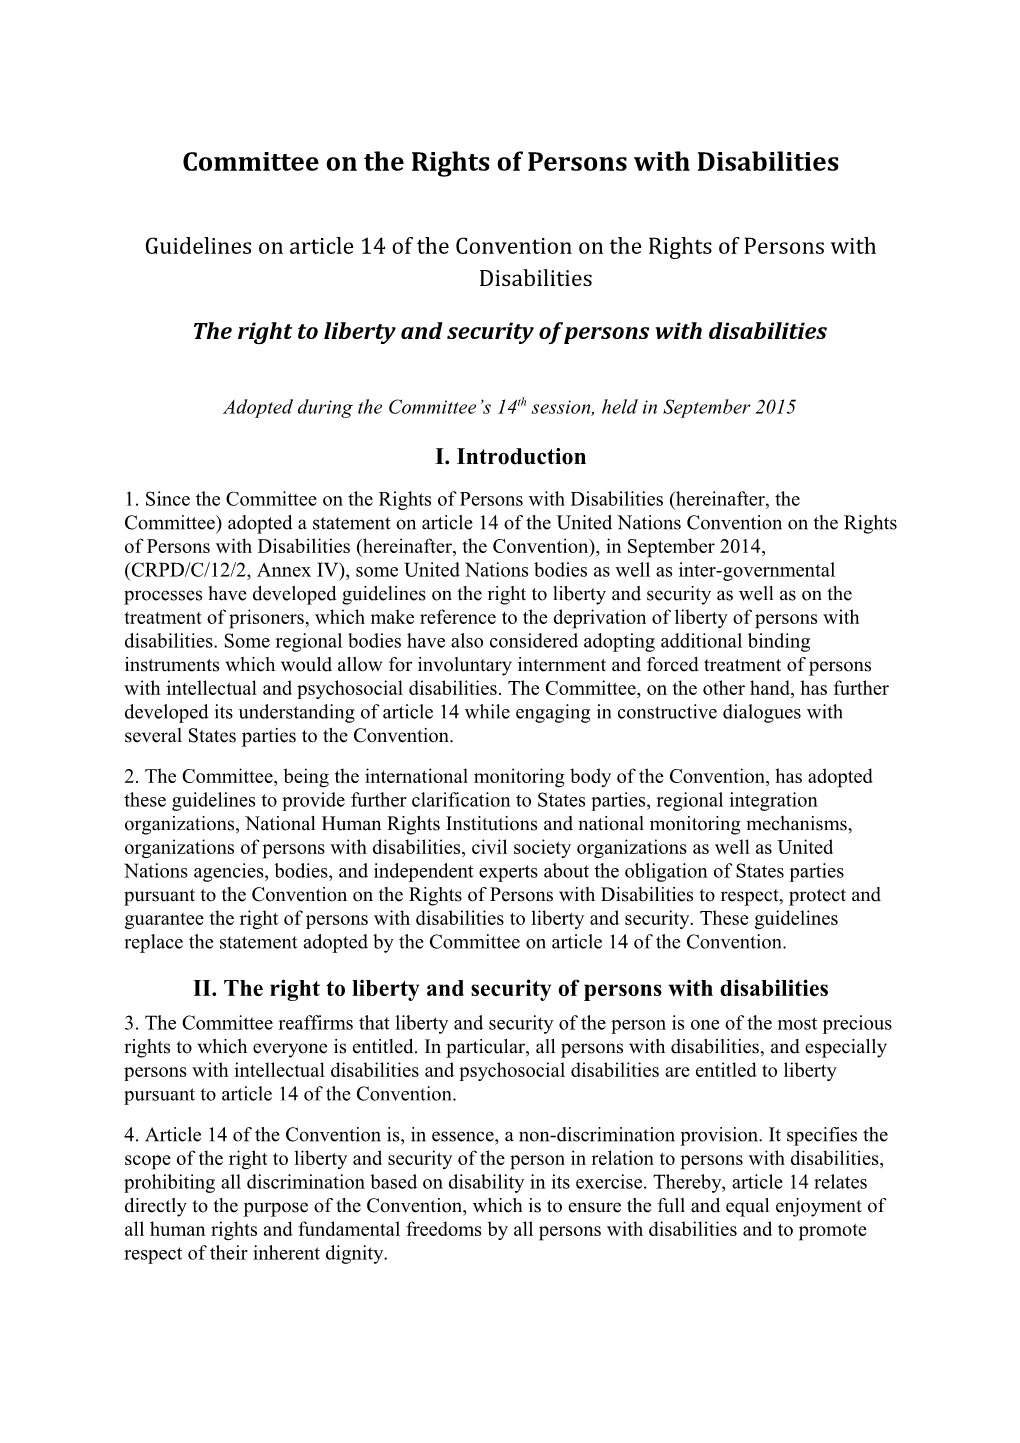 Committee on the Rights of Persons with Disabilities s1